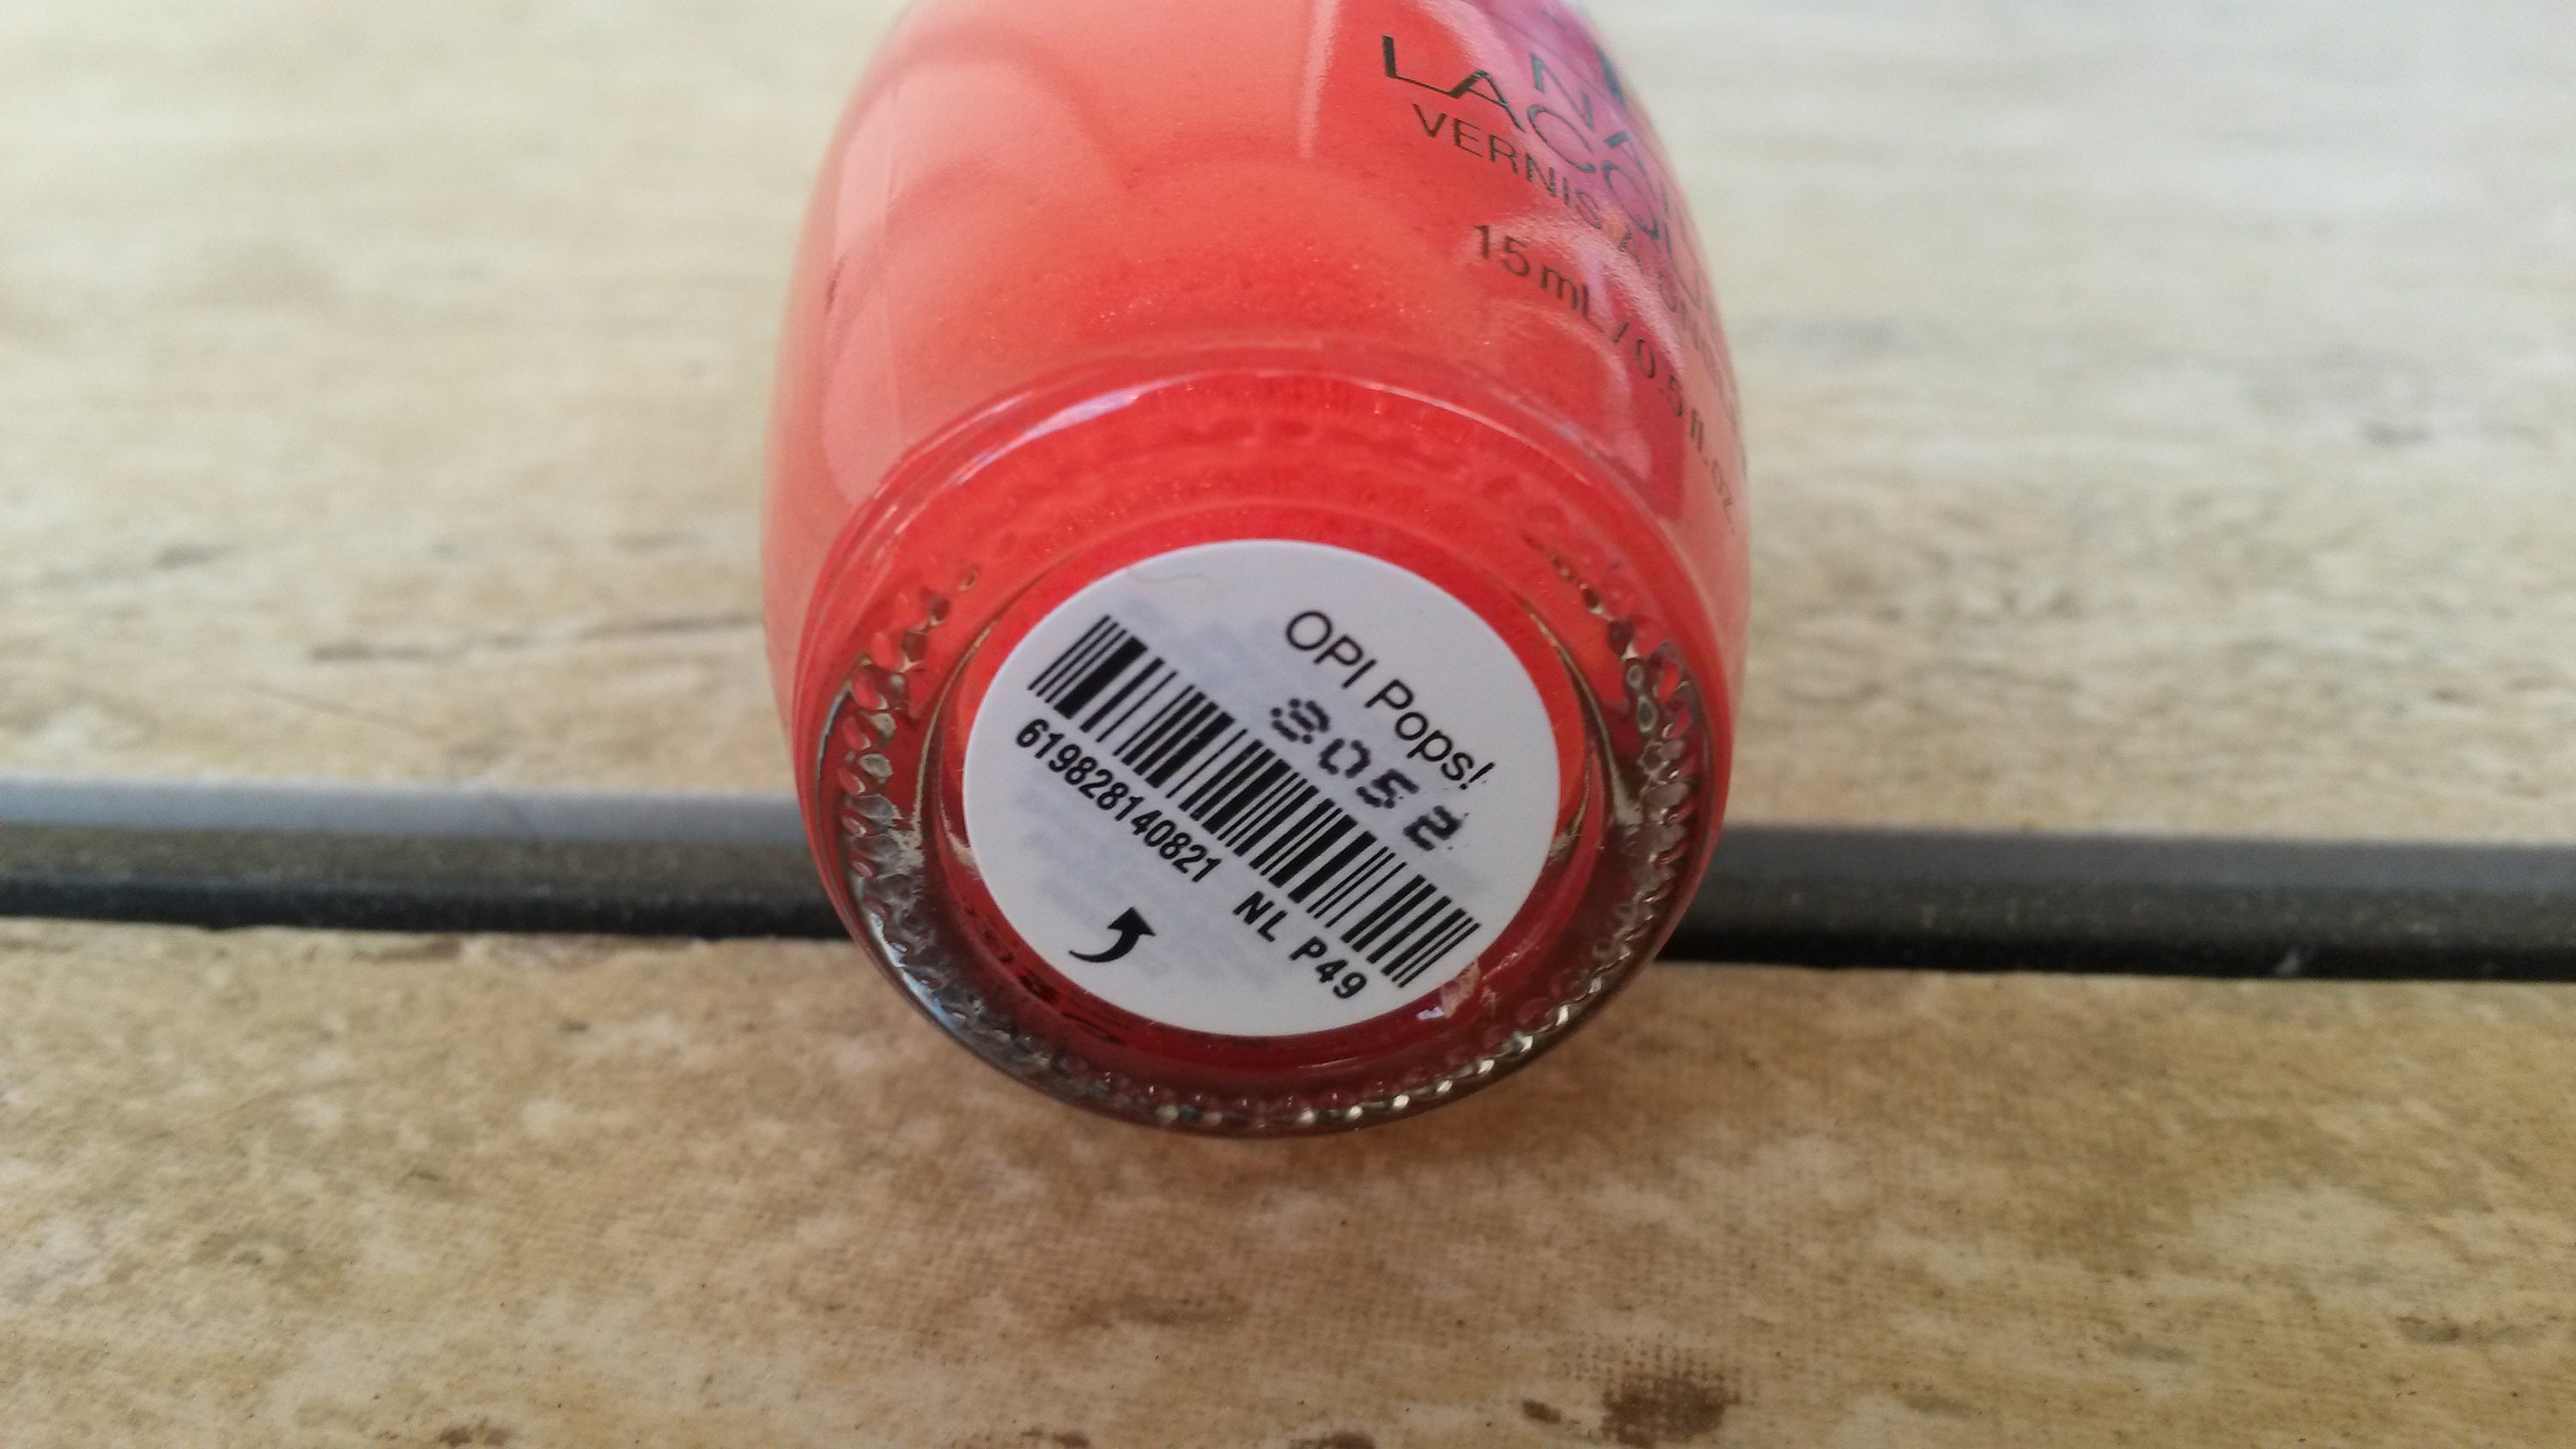 OPI Red Hot Ayers Rock - Reviews